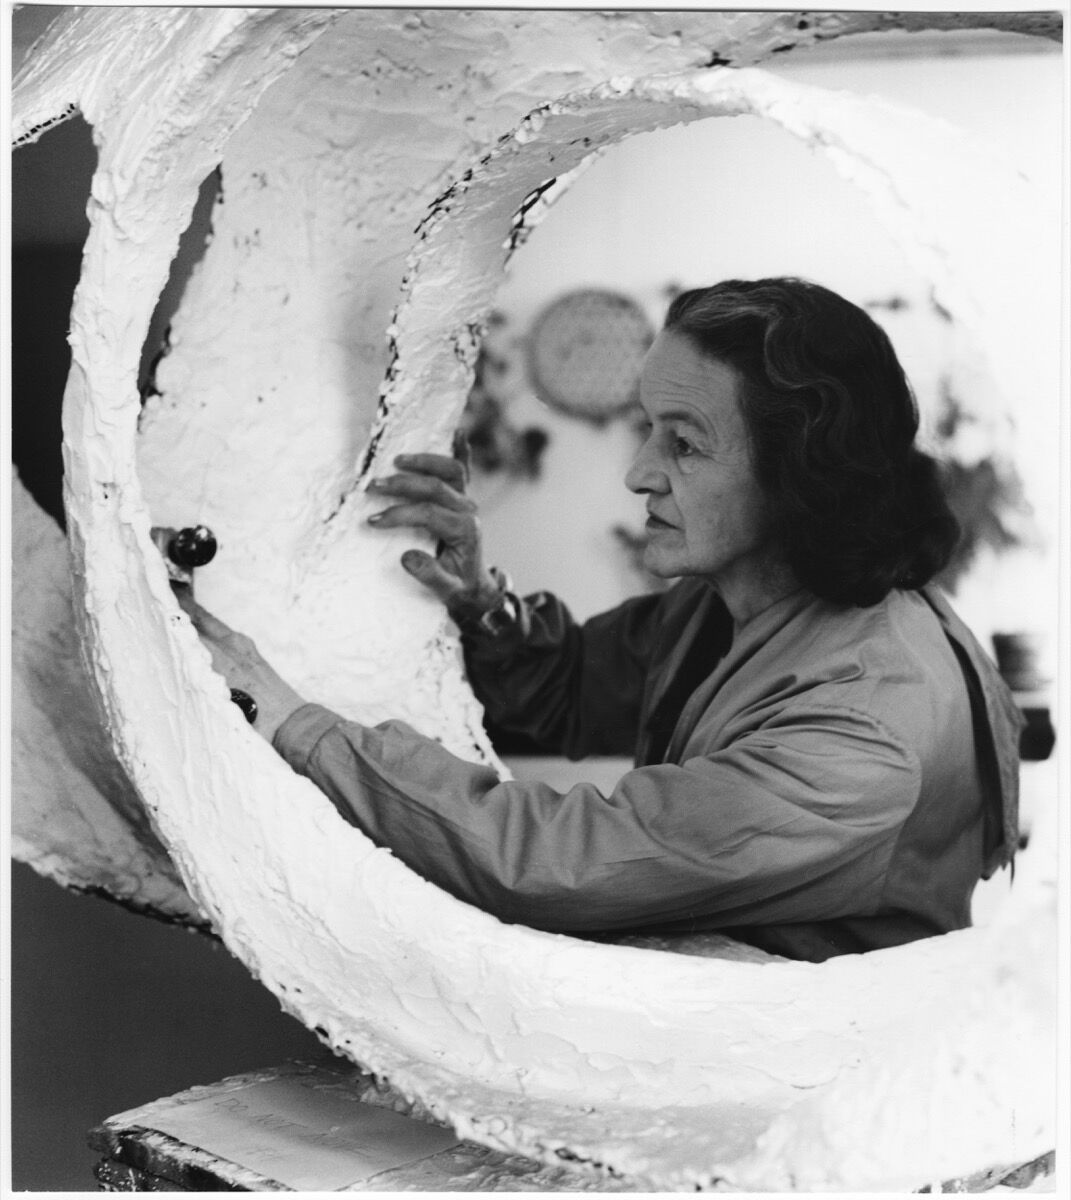 Barbara Hepworth at work on the plaster for Oval Form (“Trezion”), 1963. Photo by Val Wilmer. © Bowness, Hepworth Estate. Courtesy of the Hepworth Wakefield.